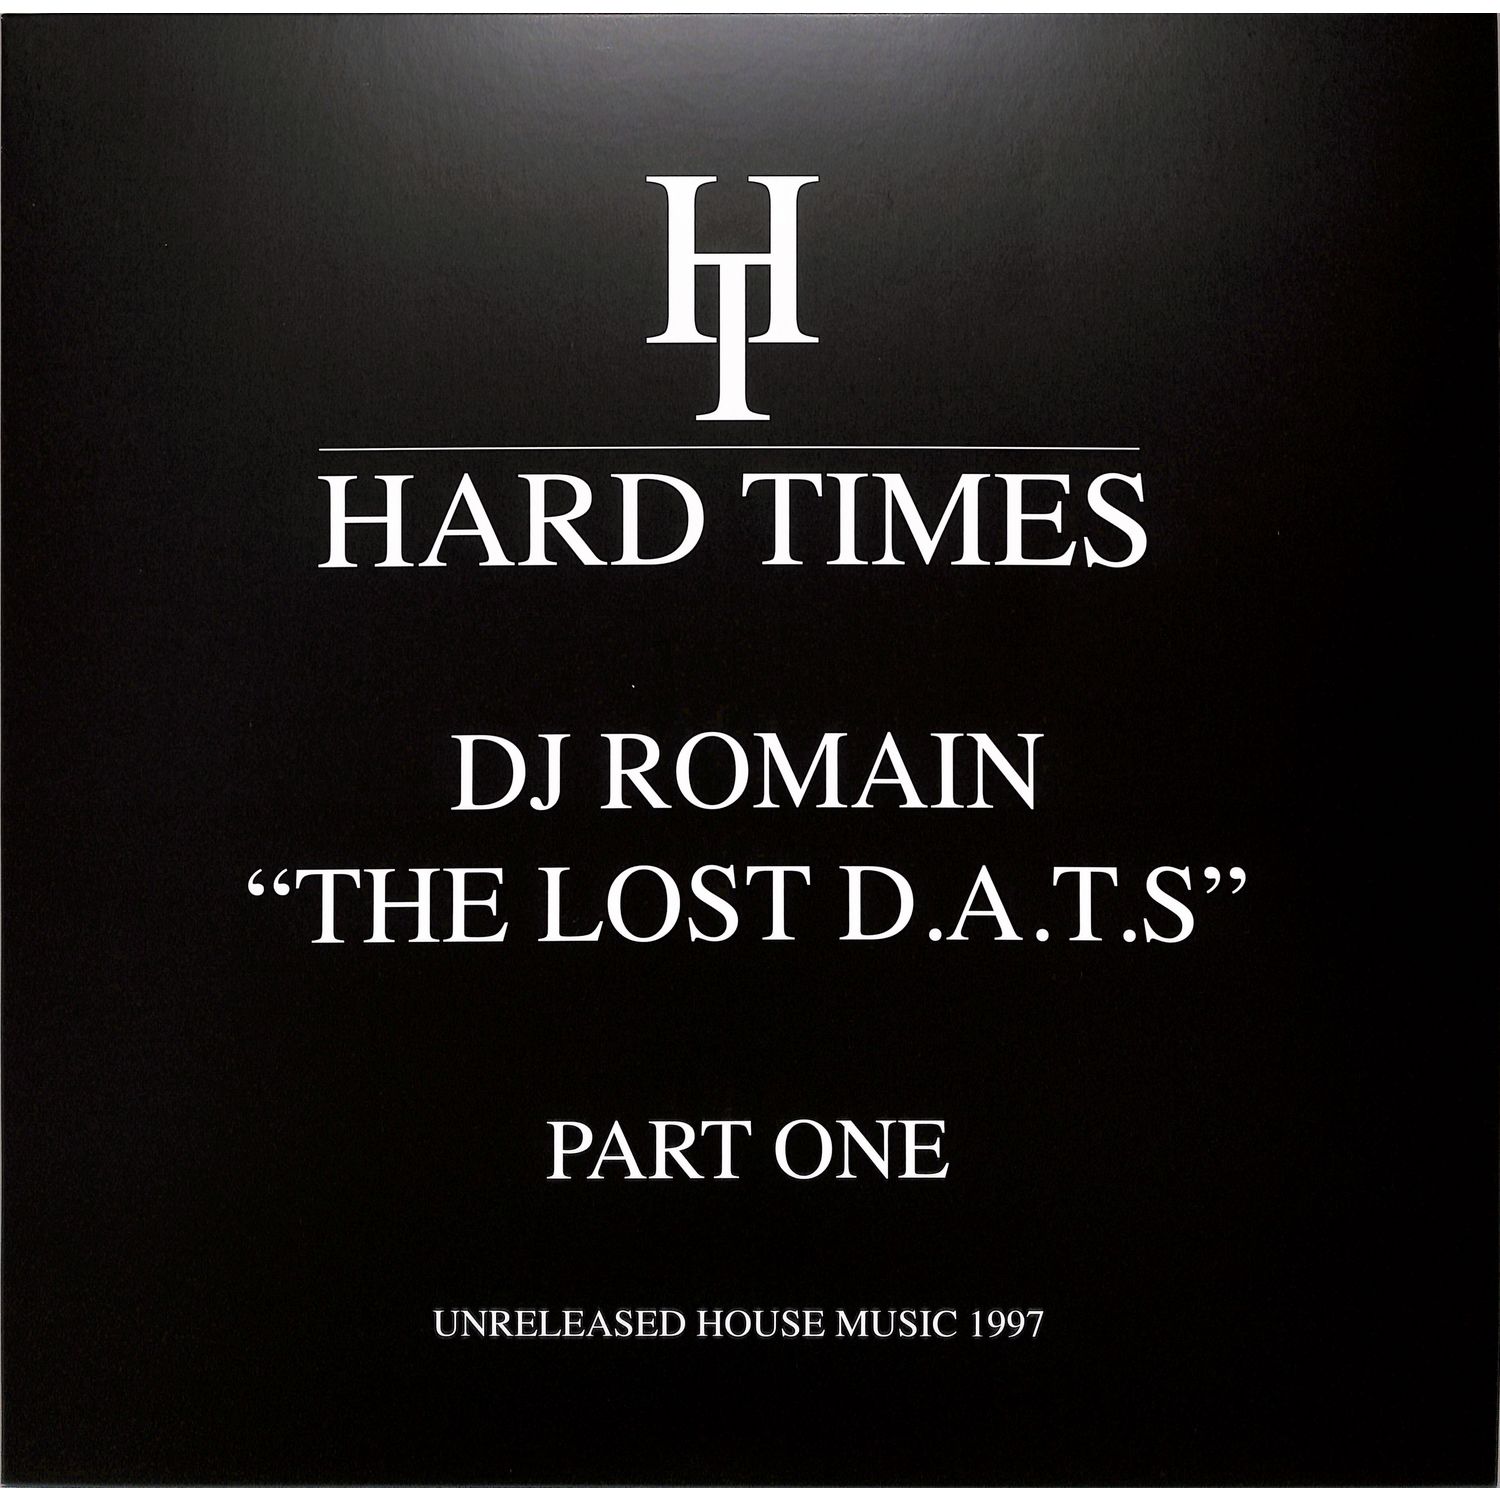 Dj Romain - THE LOST DATS PART 1 - UNRELEASED HOUSE MUSIC 1997